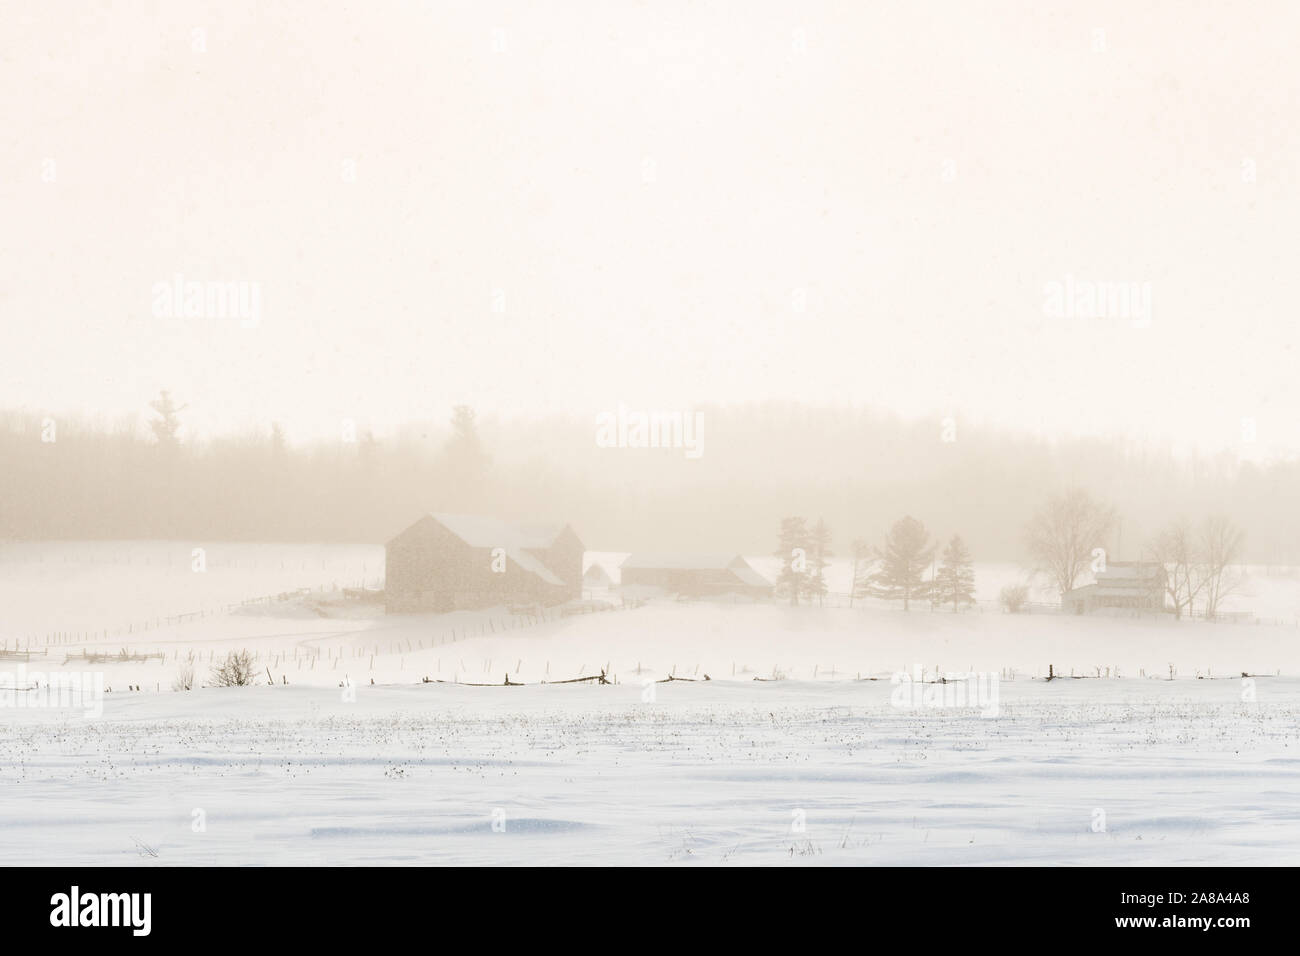 A snow covered farm and barn in a open field with forest behind are obscured by a snow squall in bright warm, golden light Stock Photo